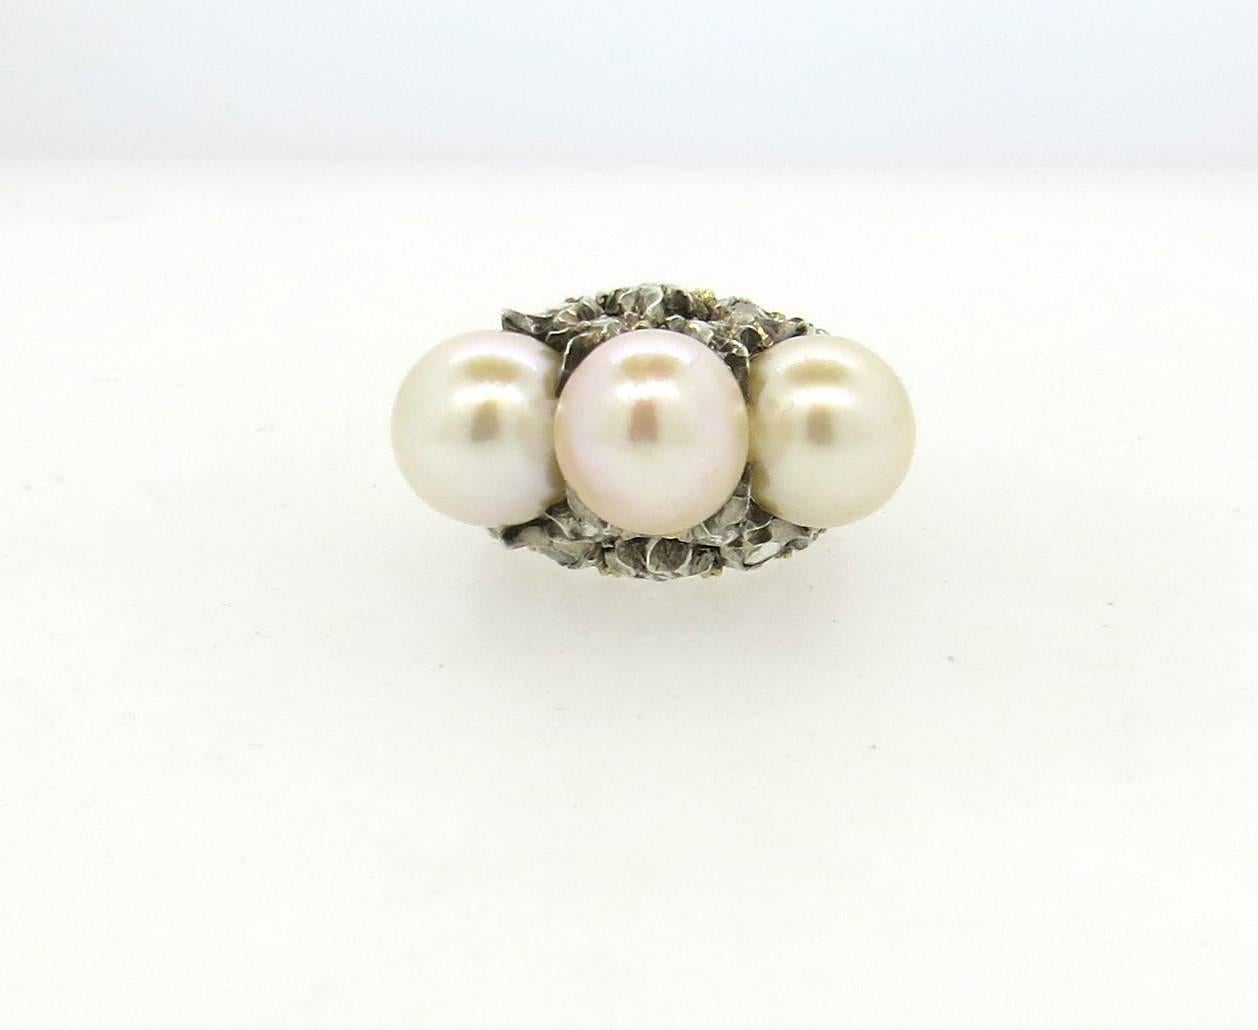 Impressive 18k gold ring, crafted by Buccellati, featuring three South Sea pearls - 10mm and 10.3mm in diameter, surrounded with rose cut diamonds. Ring is a size 6, ring top is 14mm x 25mm, sits approx. 19mm from the finger. Marked Gianmaria